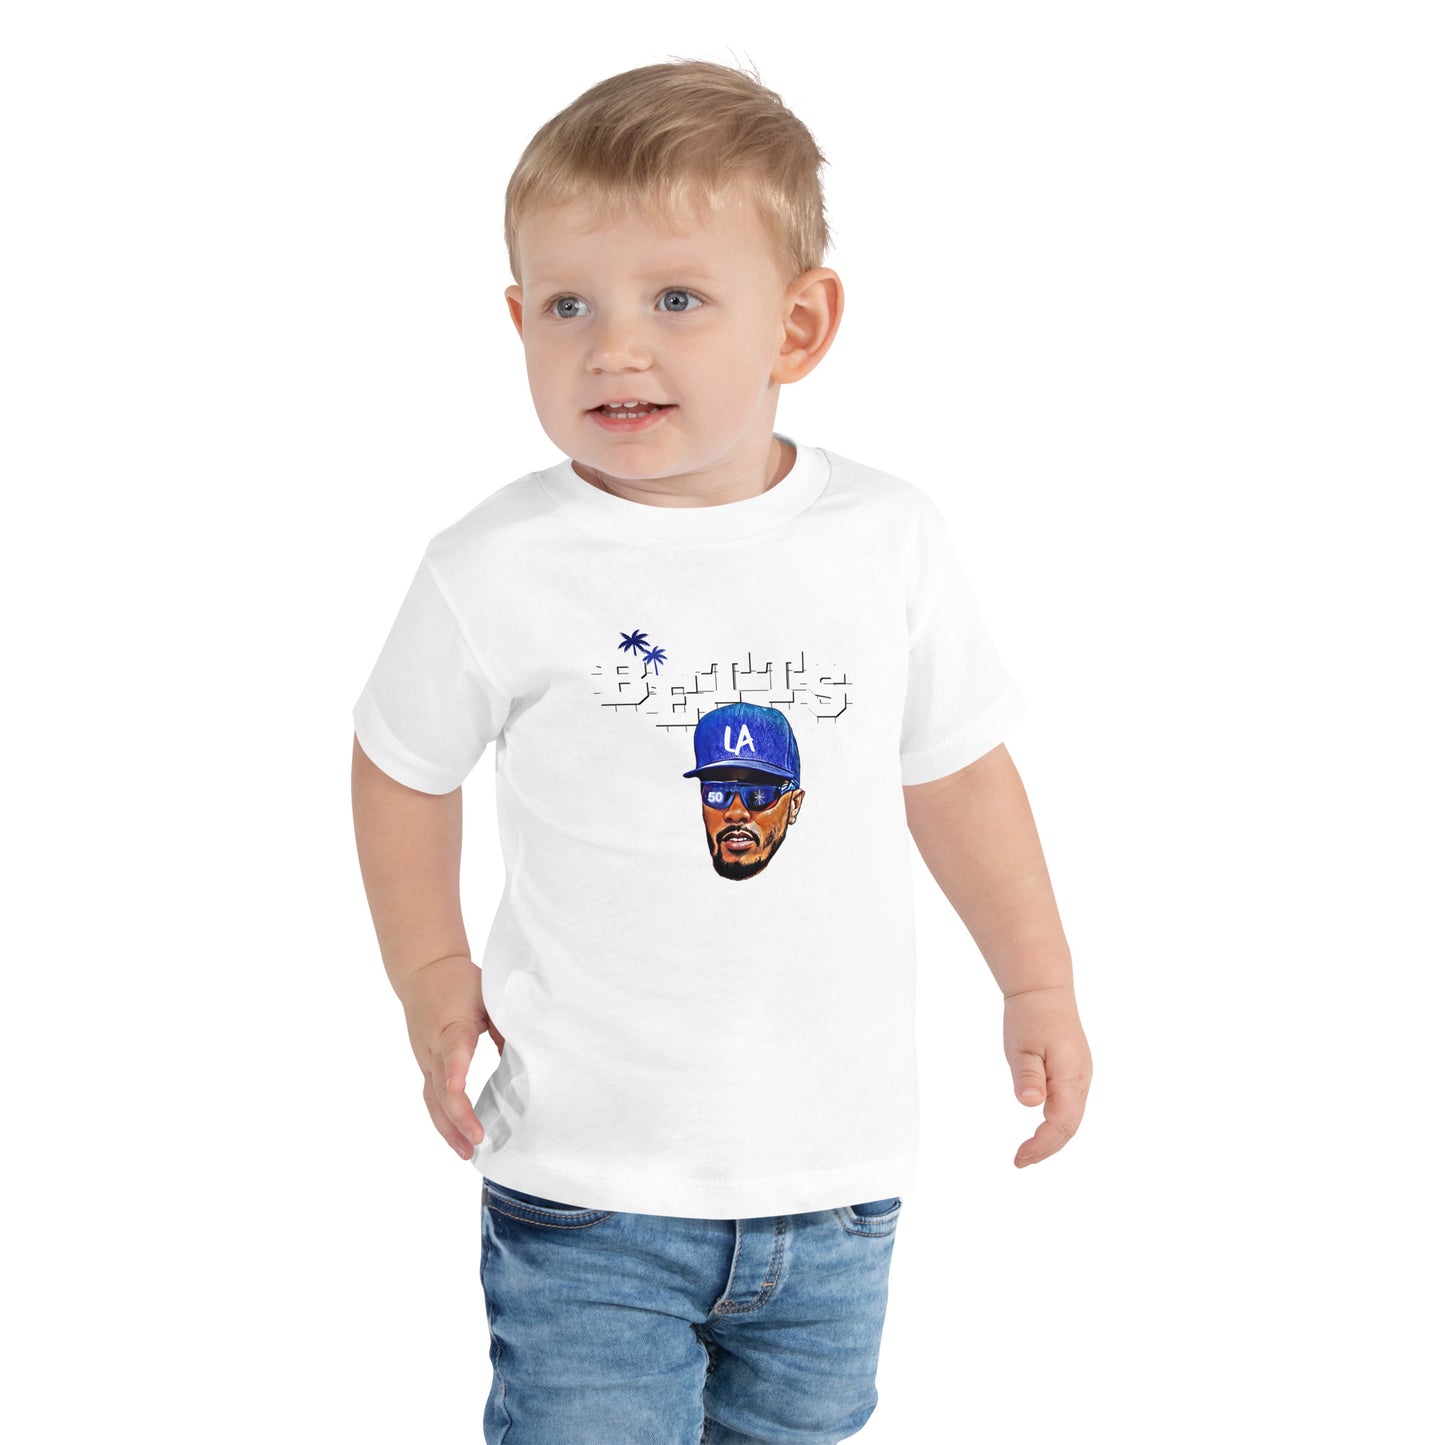 Betts on Hollywood (Toddler 2T-5T)